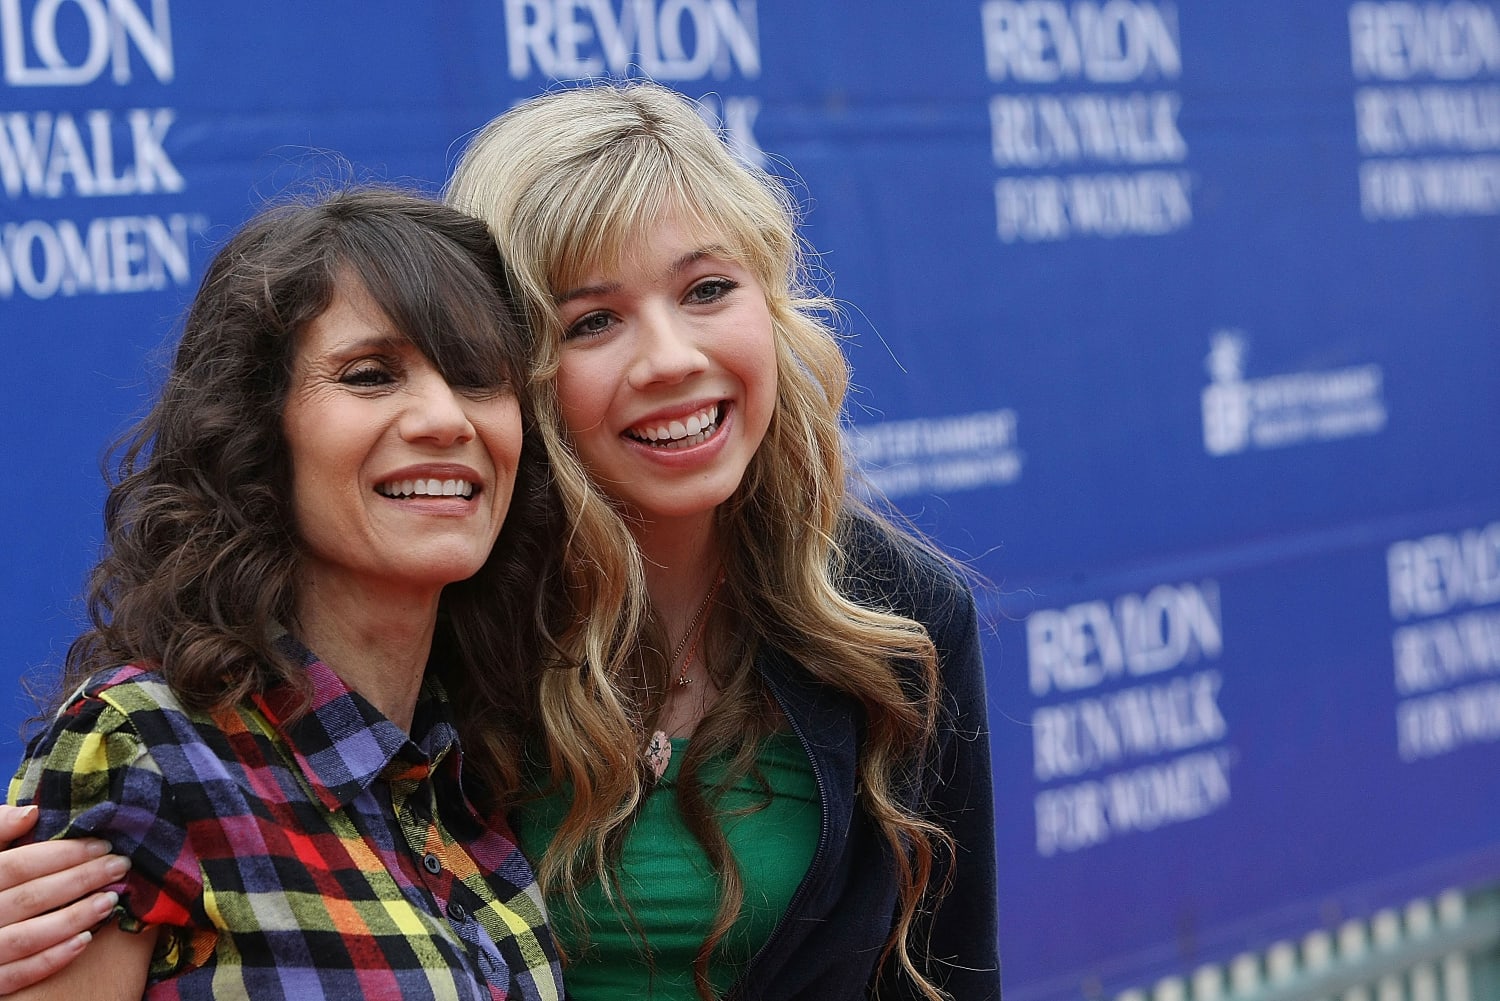 iCarly's Jennette McCurdy says she was abused by mom Debbie